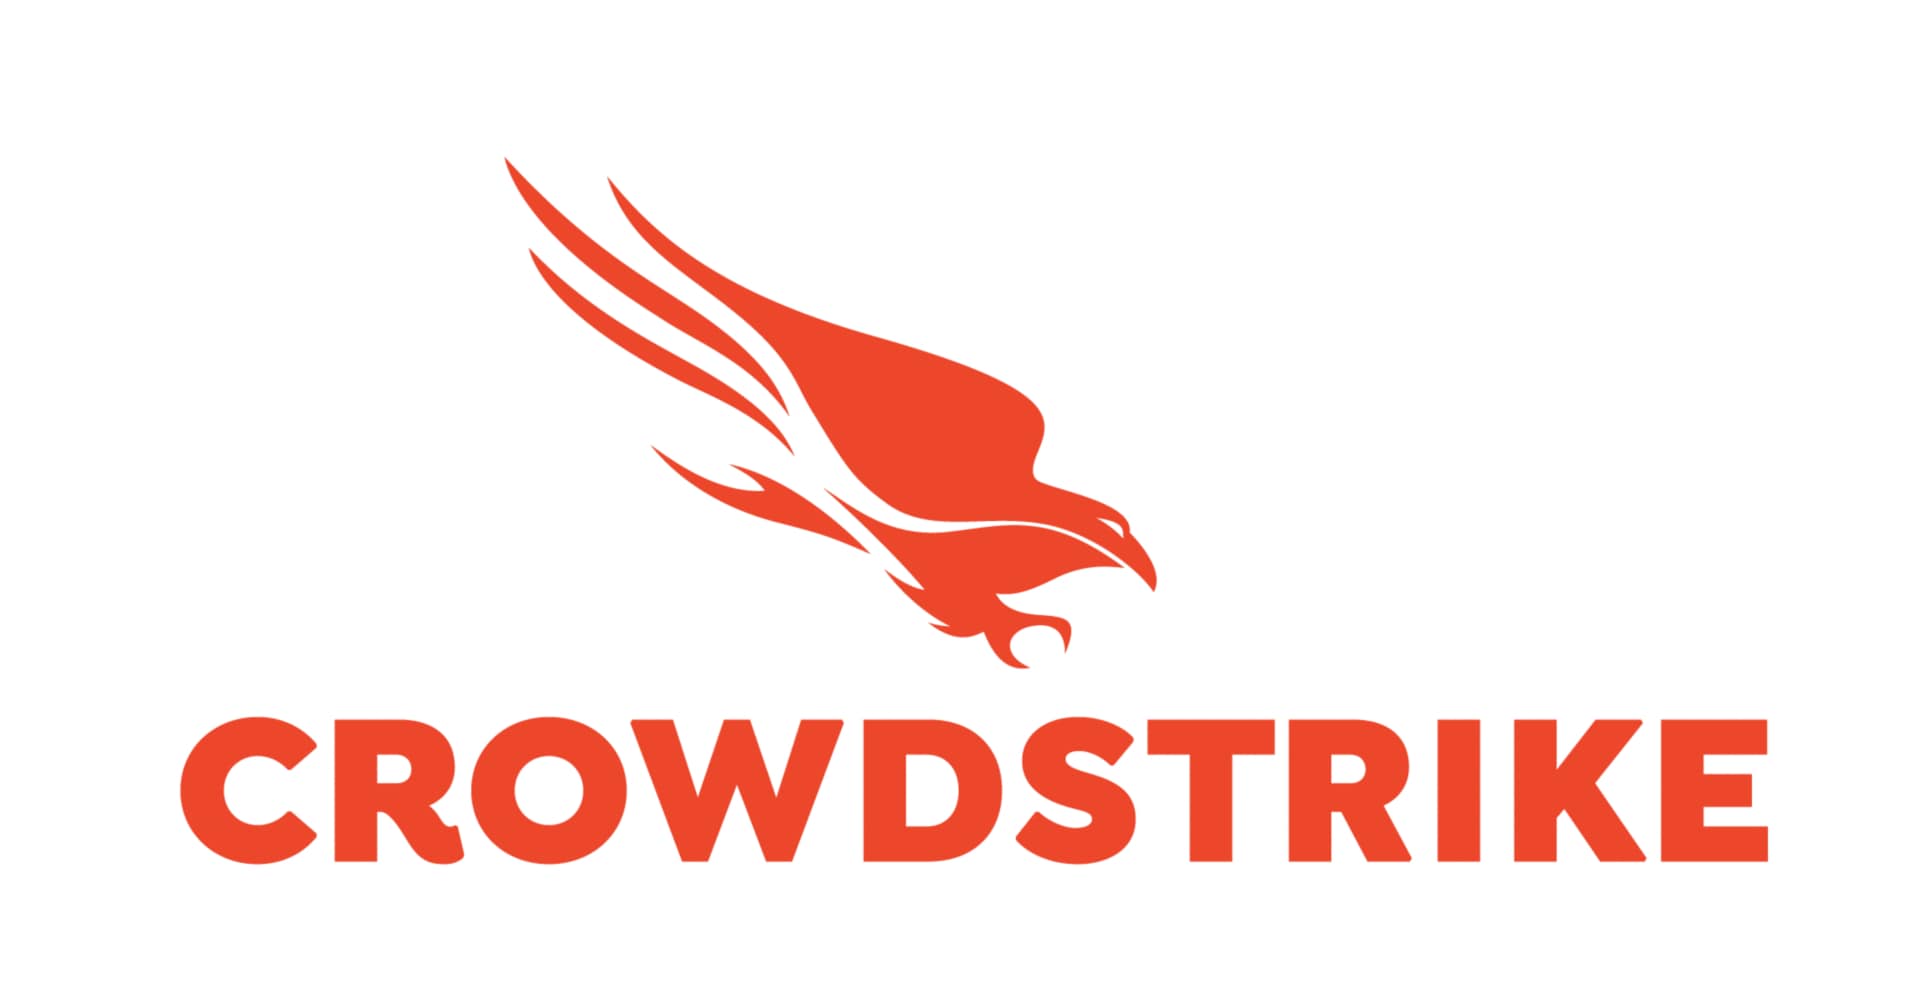 CrowdStrike 6-Month Humio Cloud for Falcon 90 Day Retention Software Subscription (1,500-1,999 Licenses)